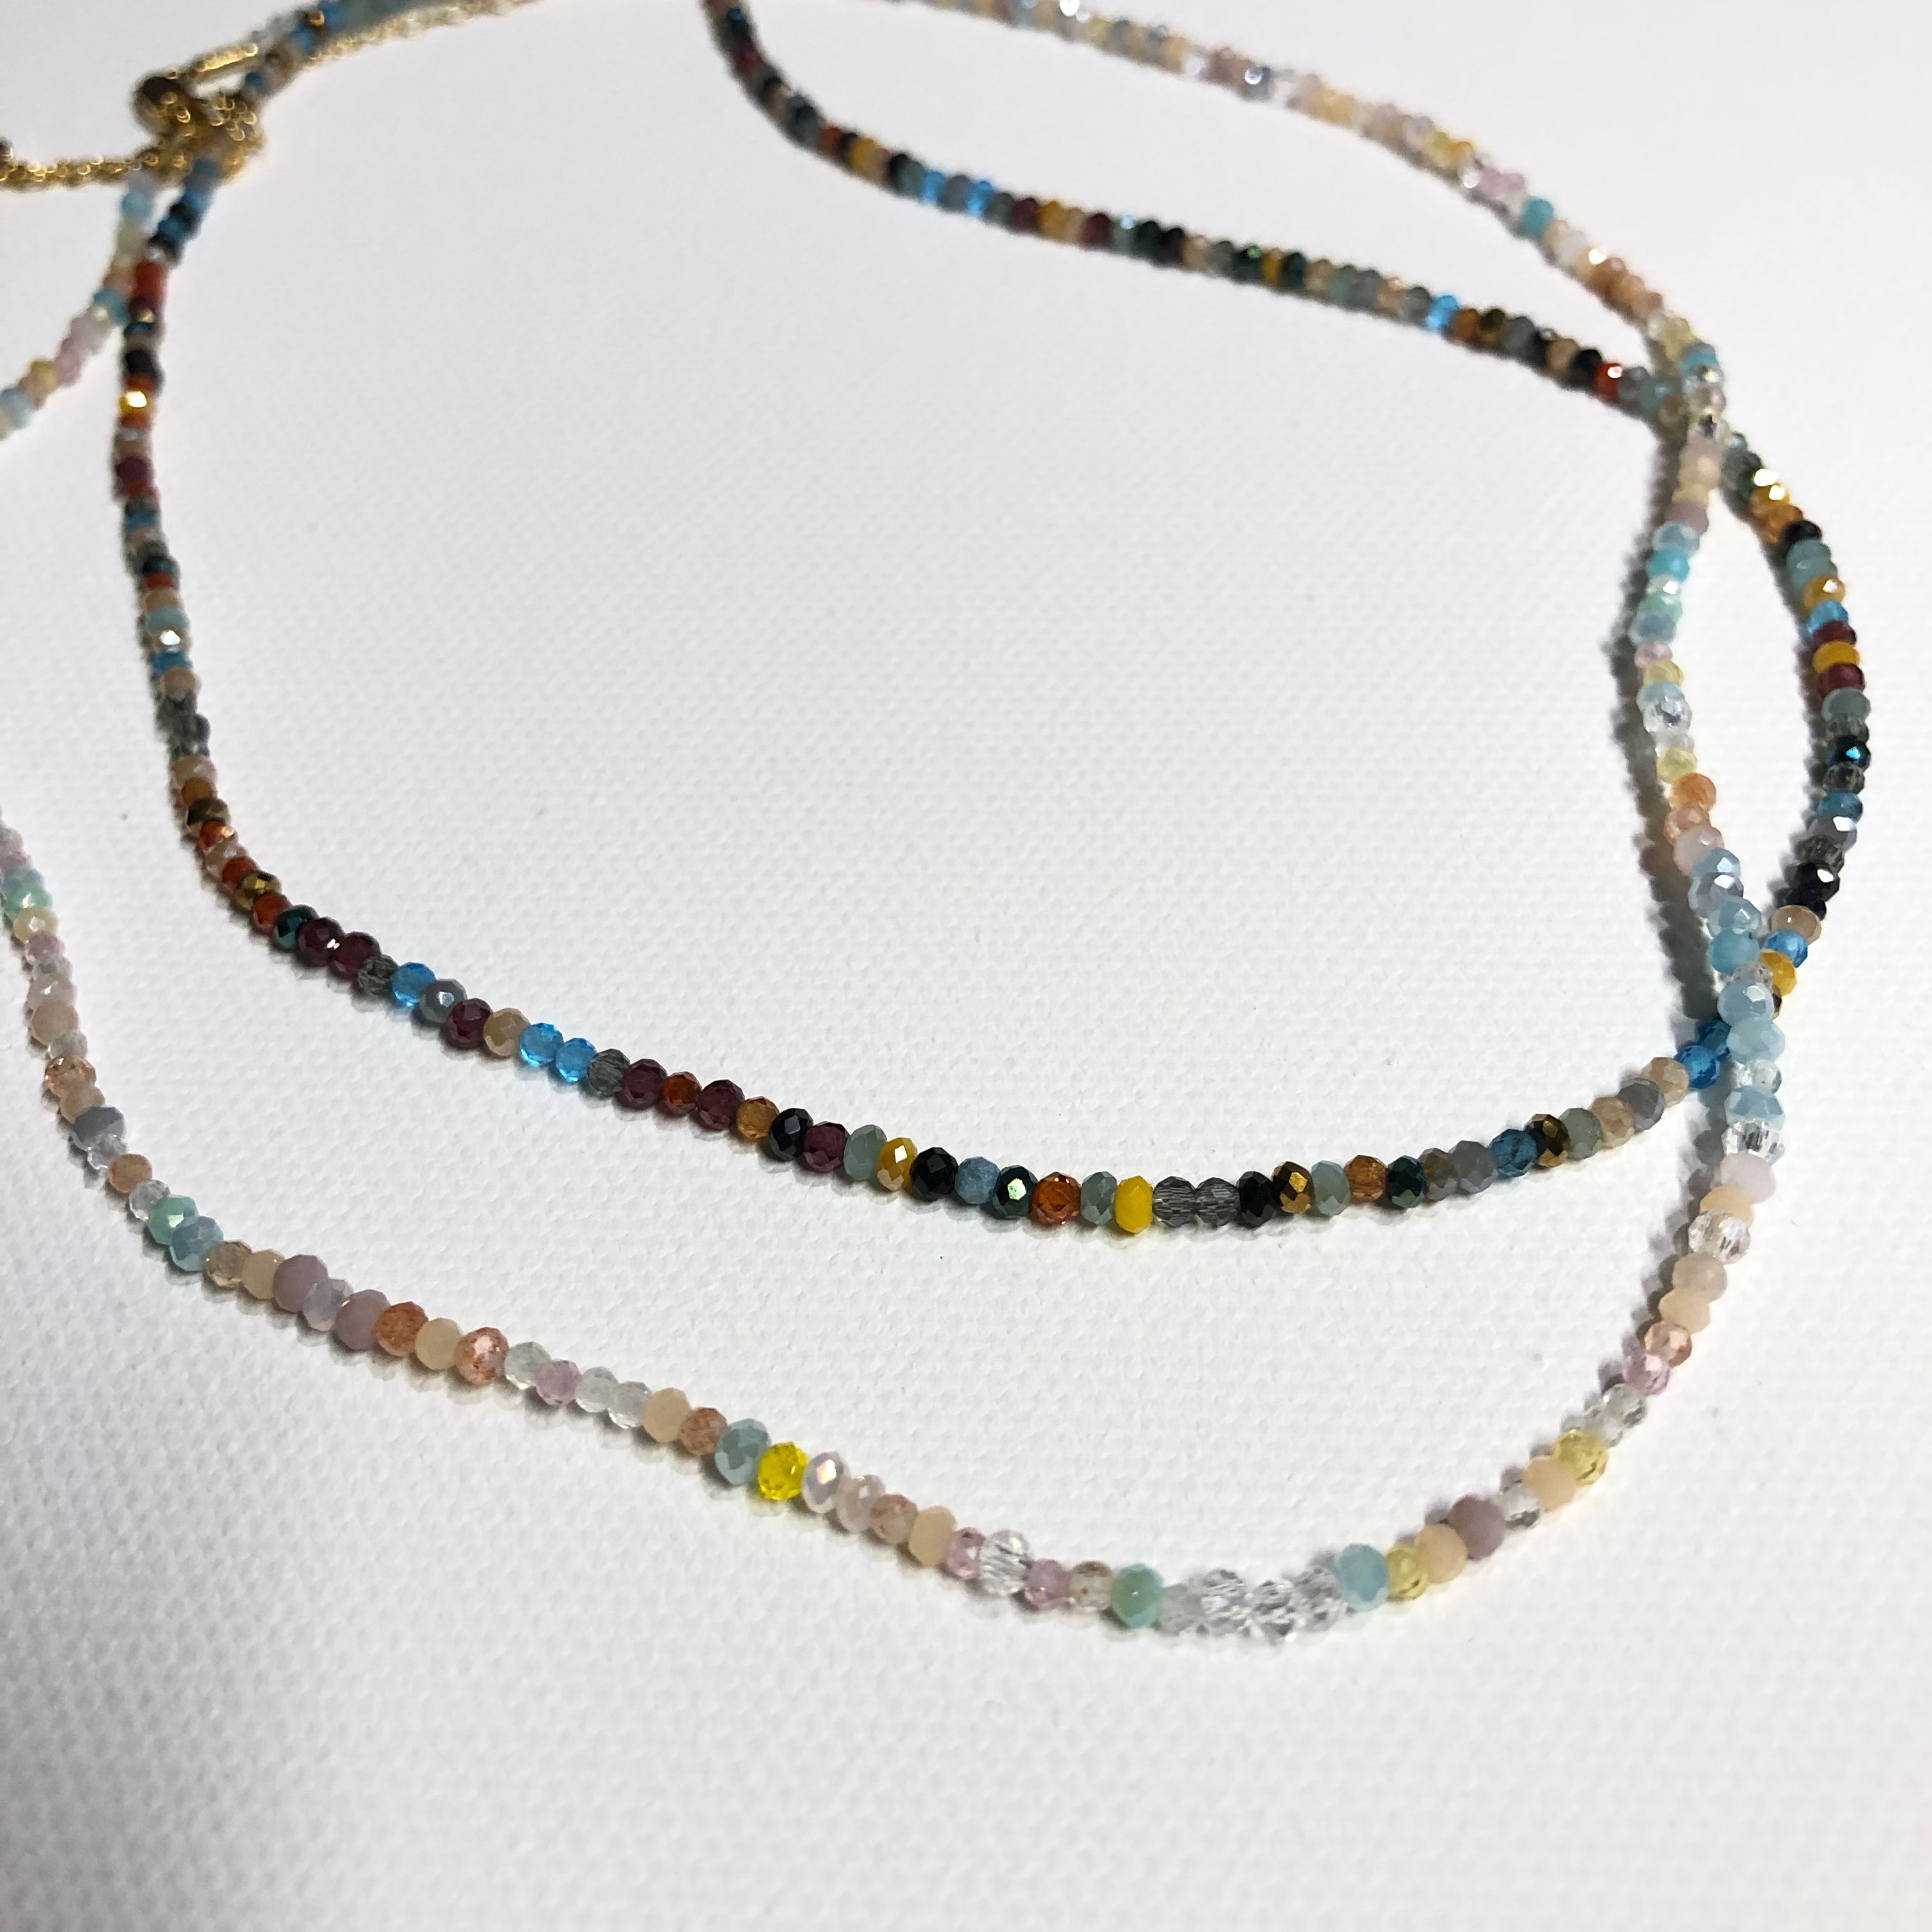 NL003 Shimmer Beads Necklace